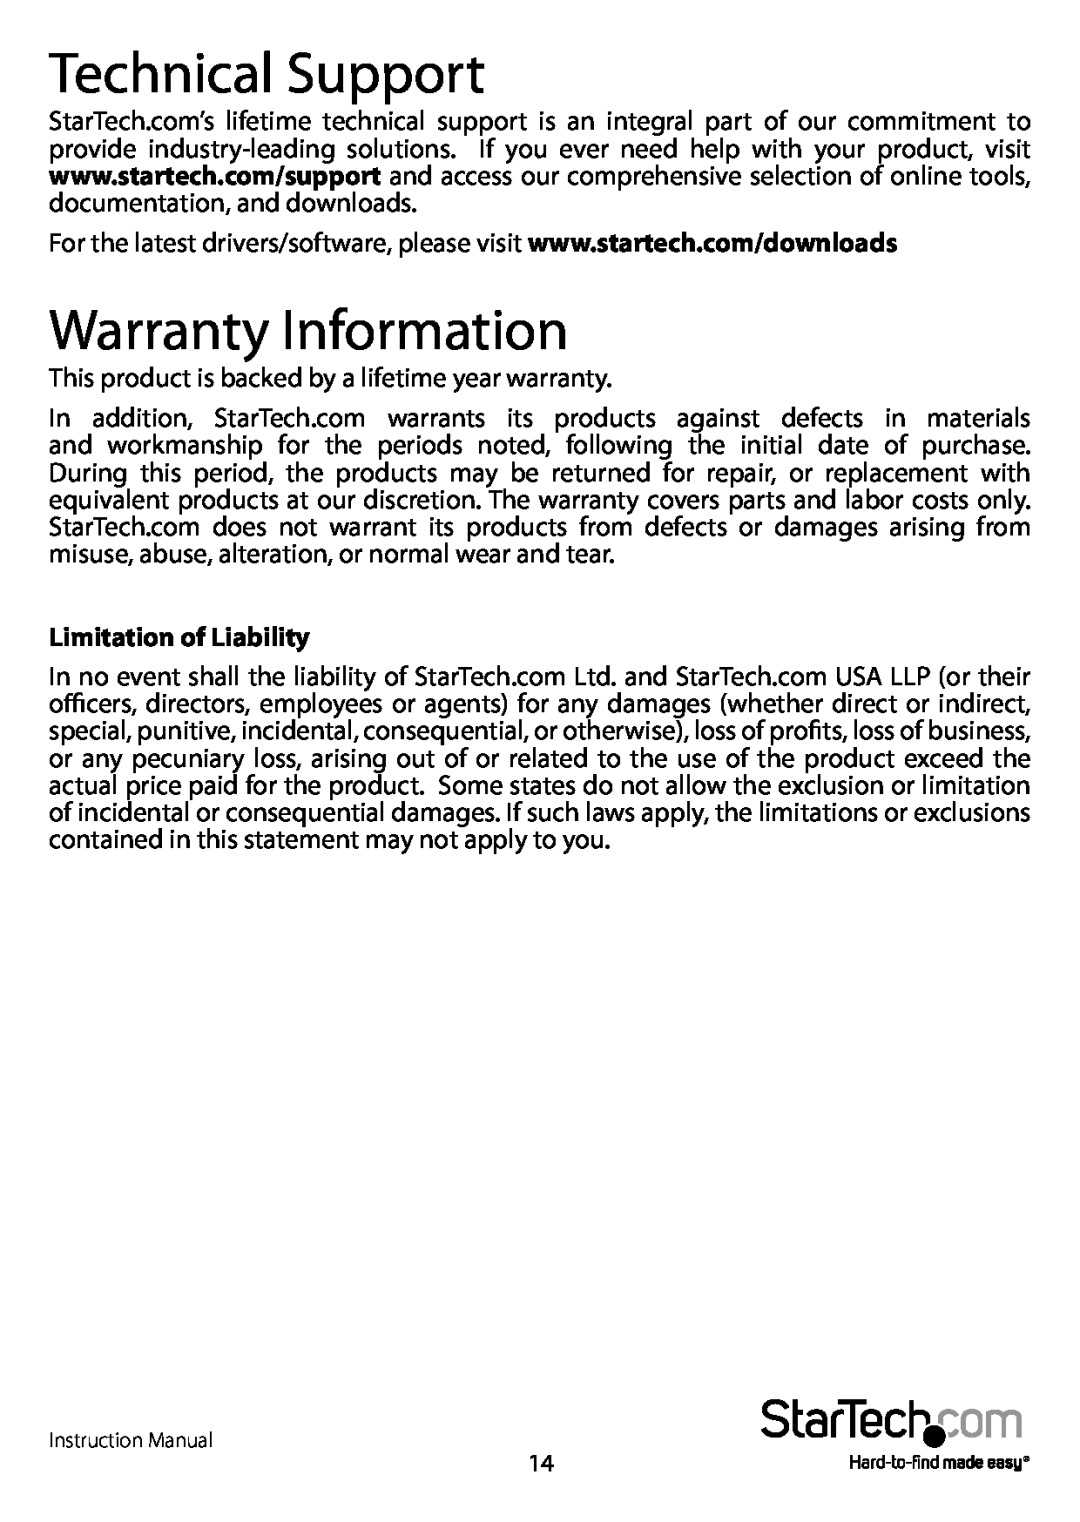 StarTech.com USBDUP15 manual Technical Support, Warranty Information, Limitation of Liability 